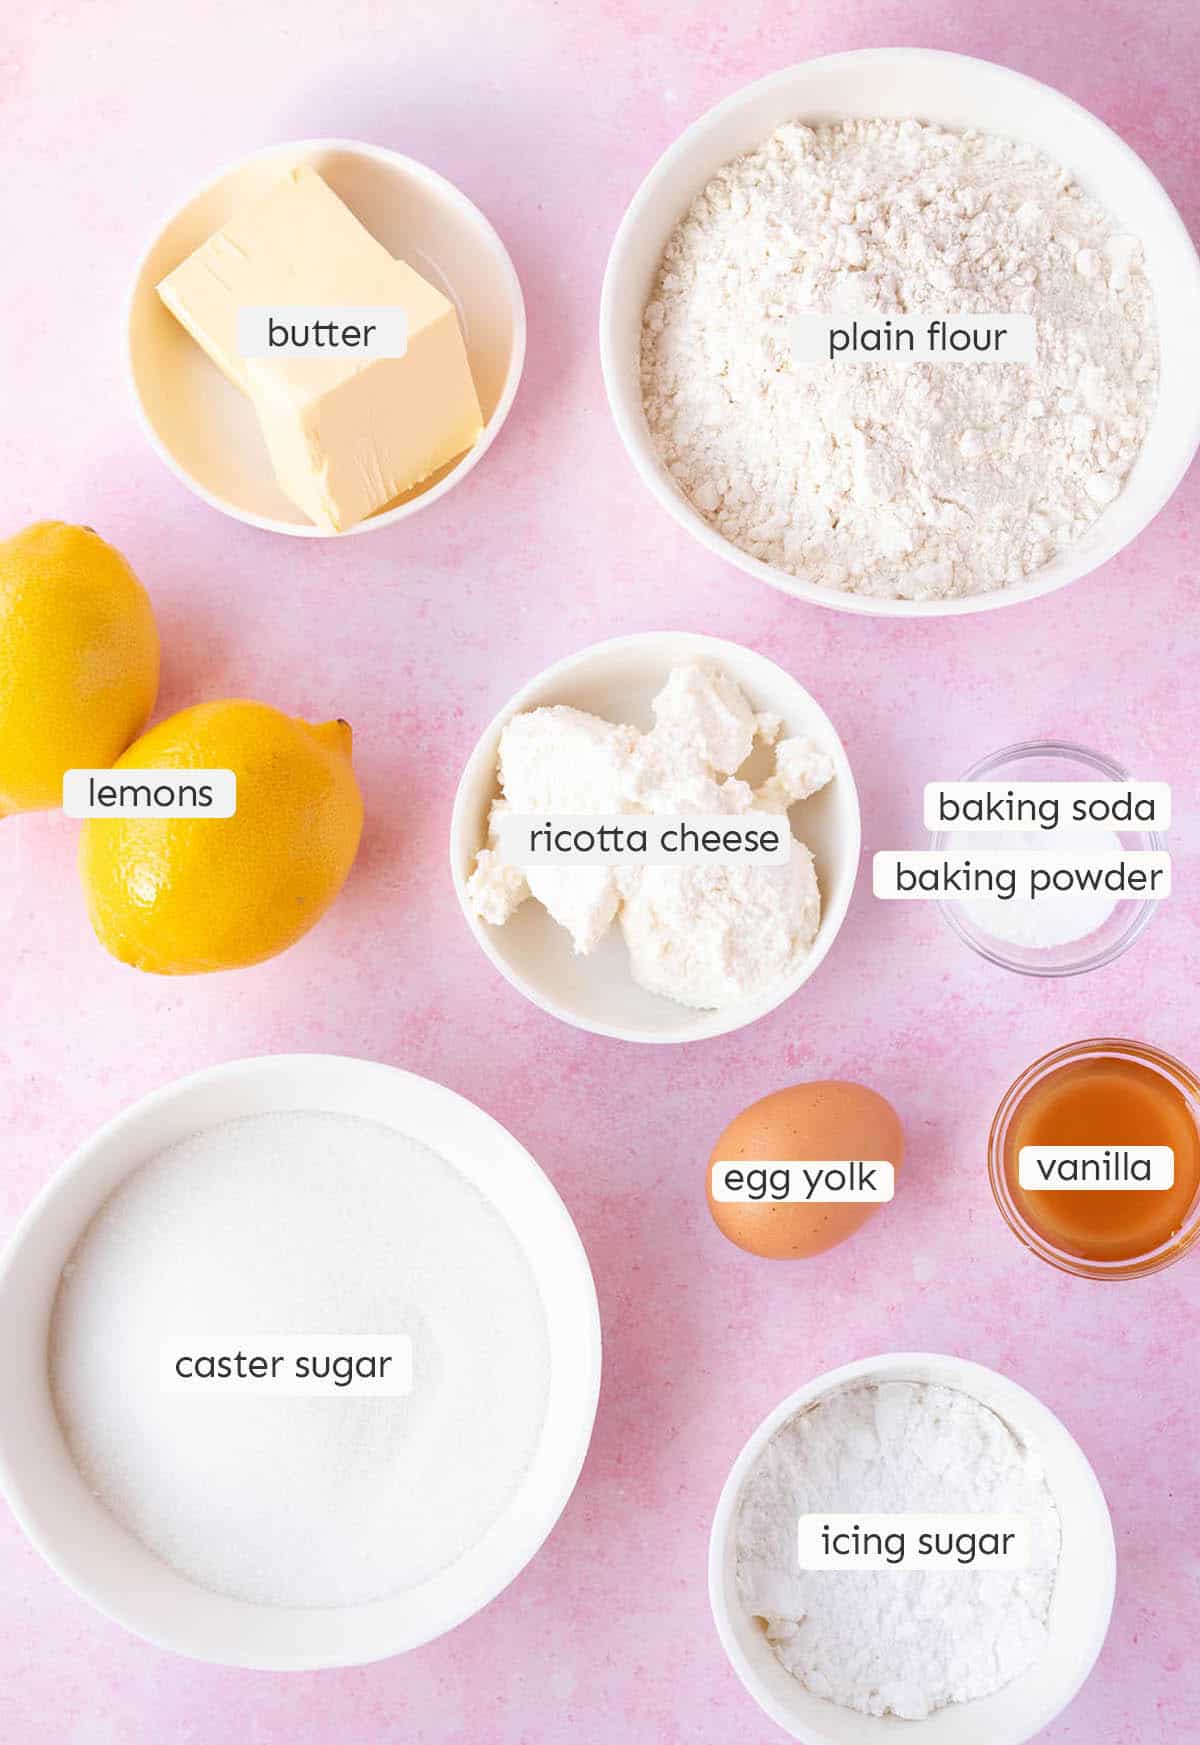 All the ingredients needed to make Lemon Ricotta Cookies from scratch on a pink background.